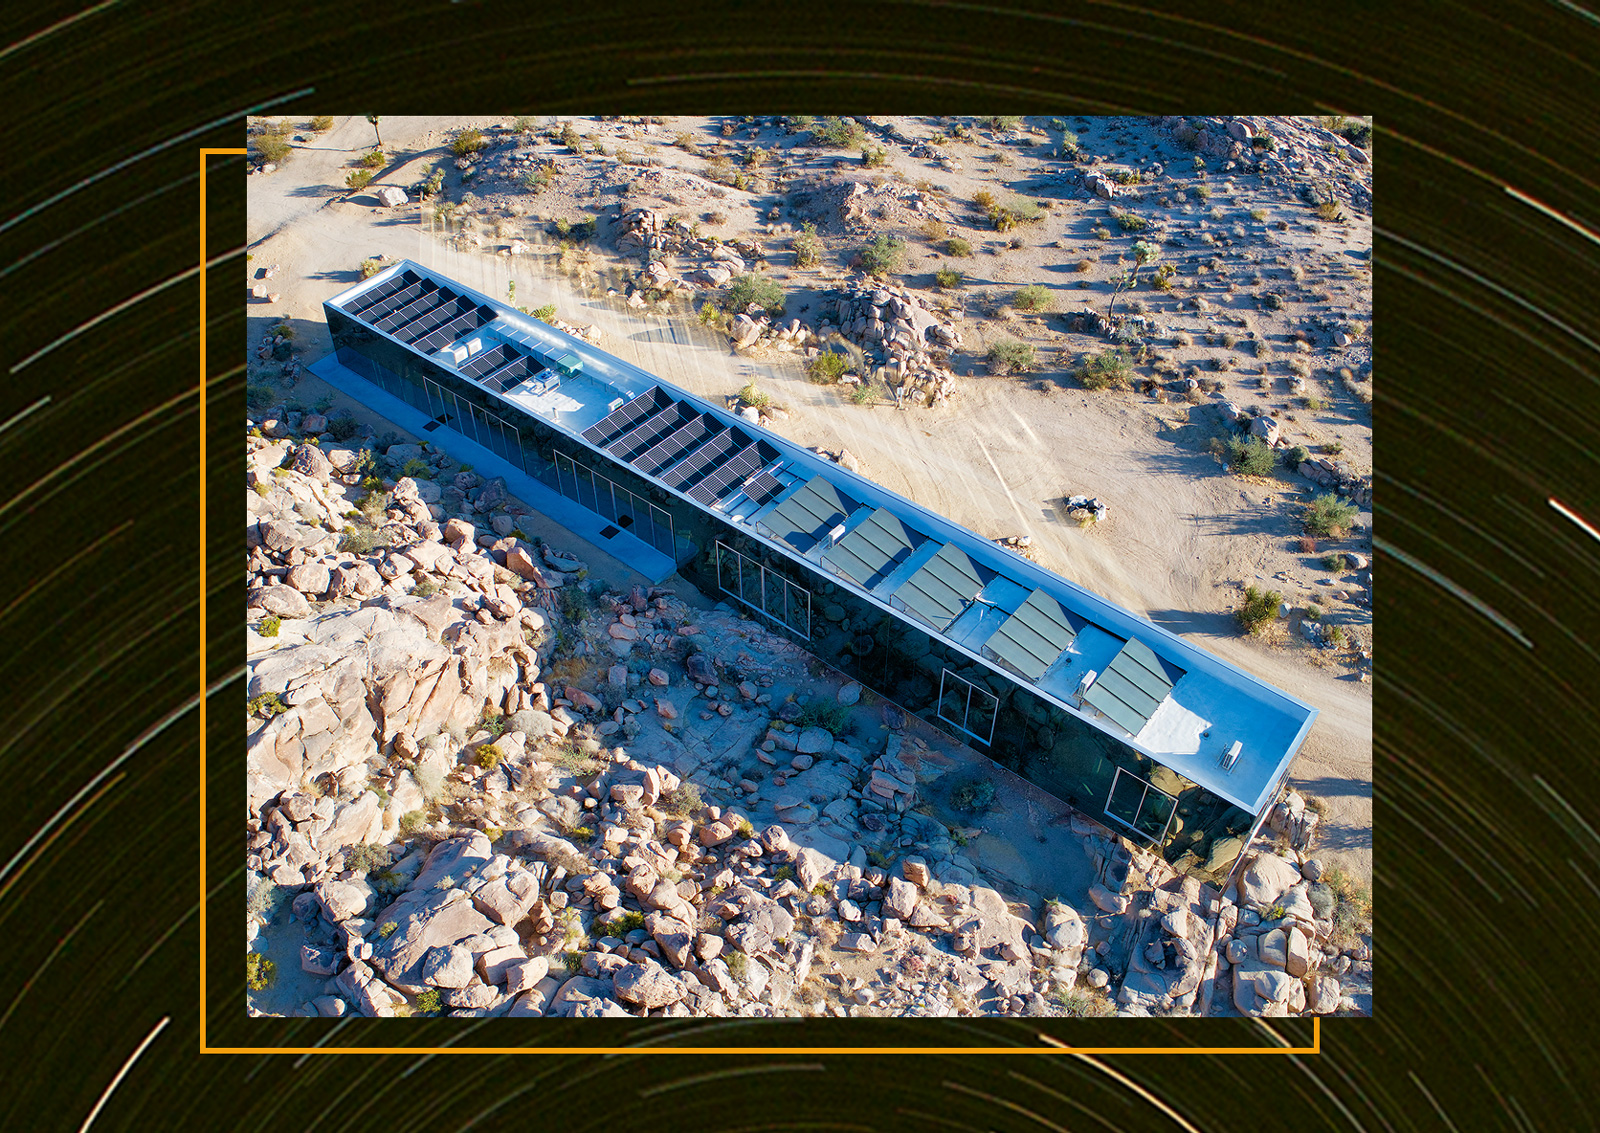 Why Joshua Tree’s $18M House Remains “Invisible” to Buyers